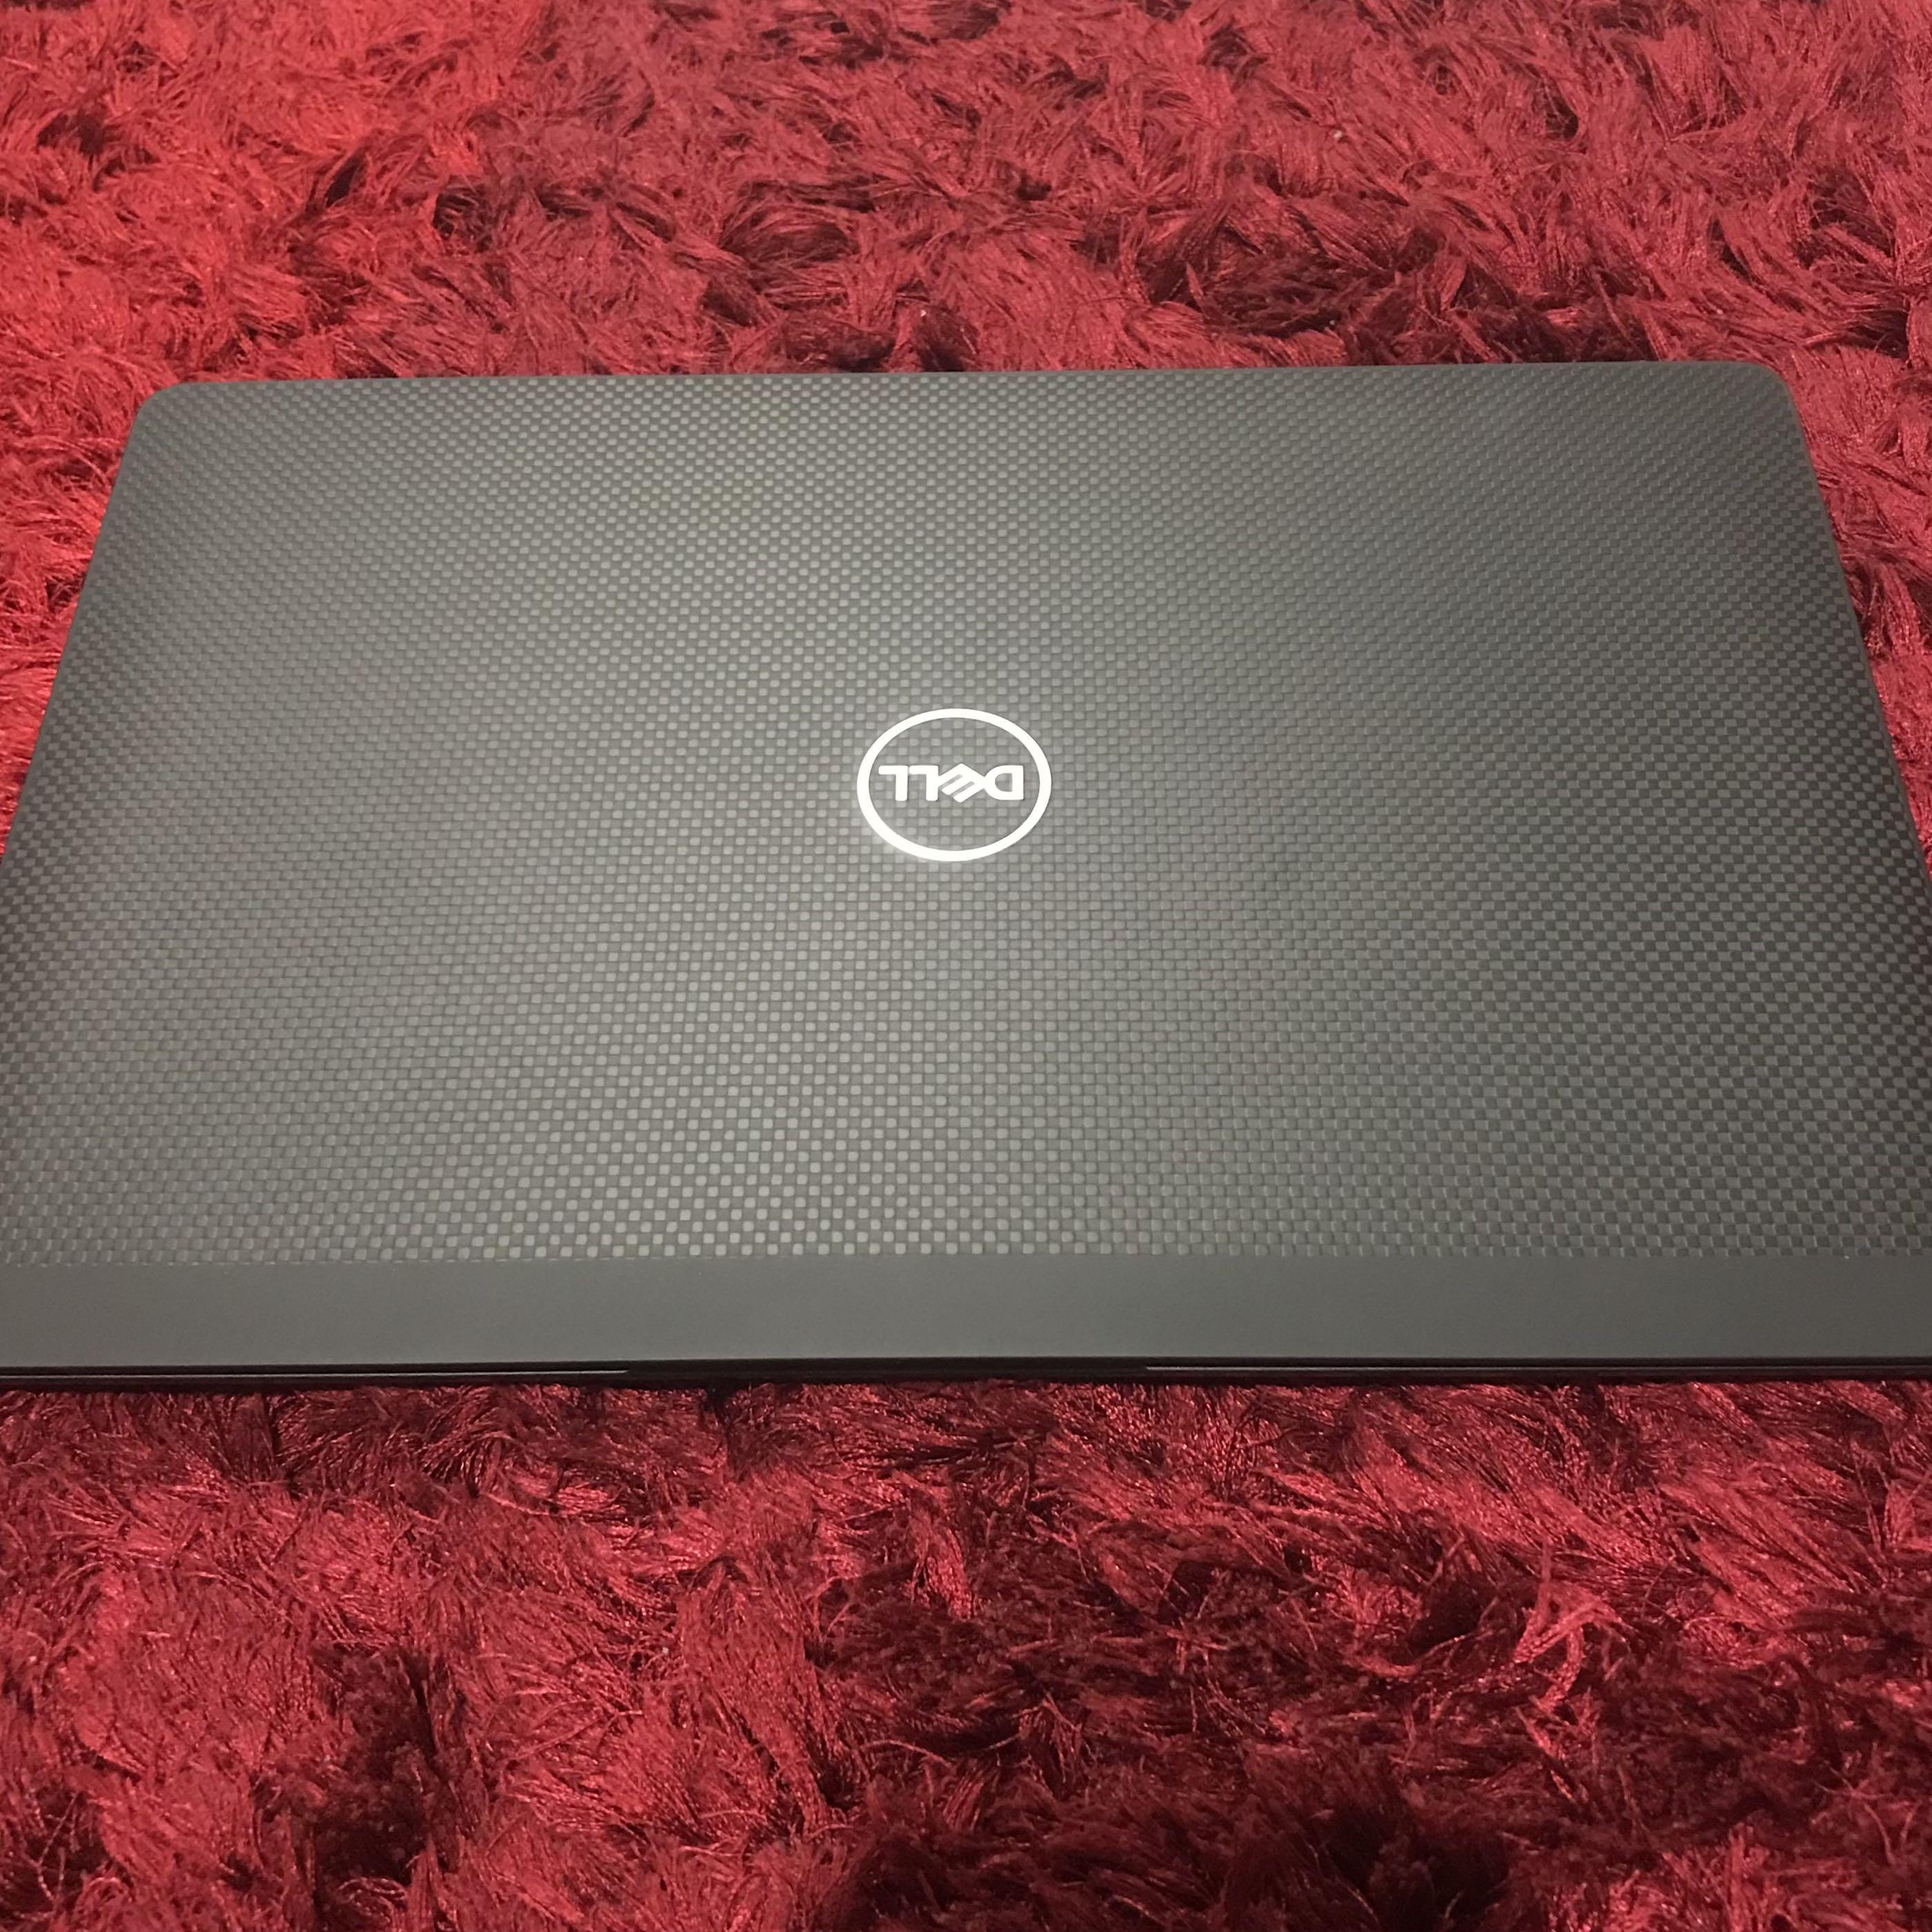 Dell Latitude 7320 Laptop-Warranty 3 Years of ProSupport, Computers & Tech,  Laptops & Notebooks on Carousell